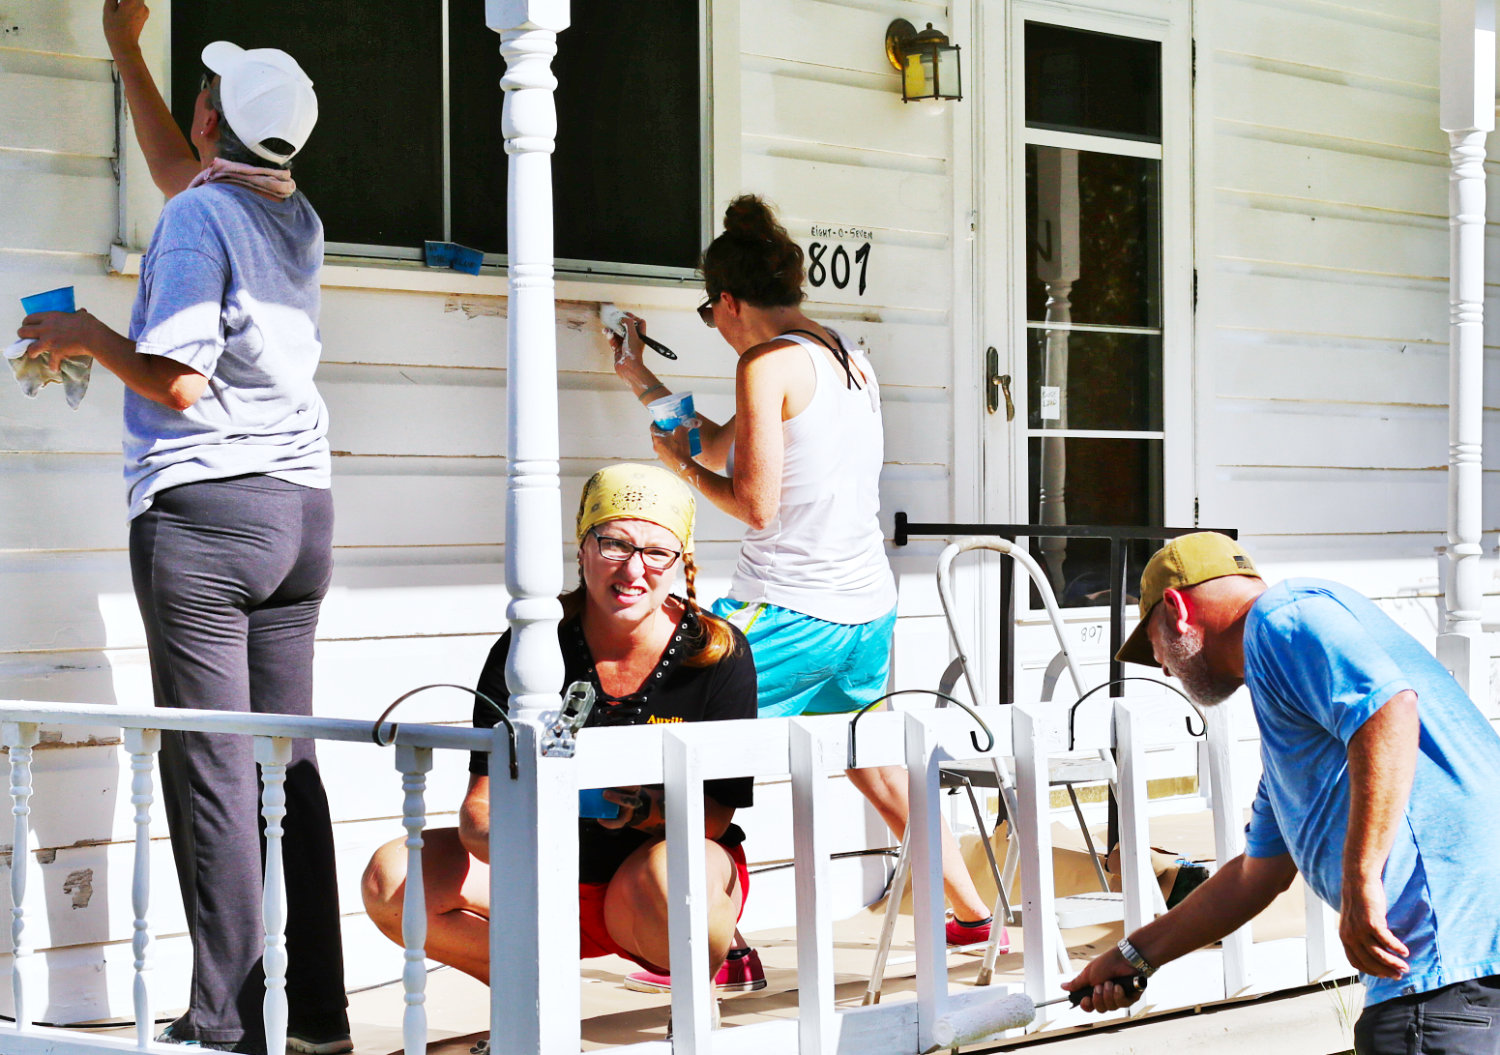 Volunteers busy painting at the Shackleford home.